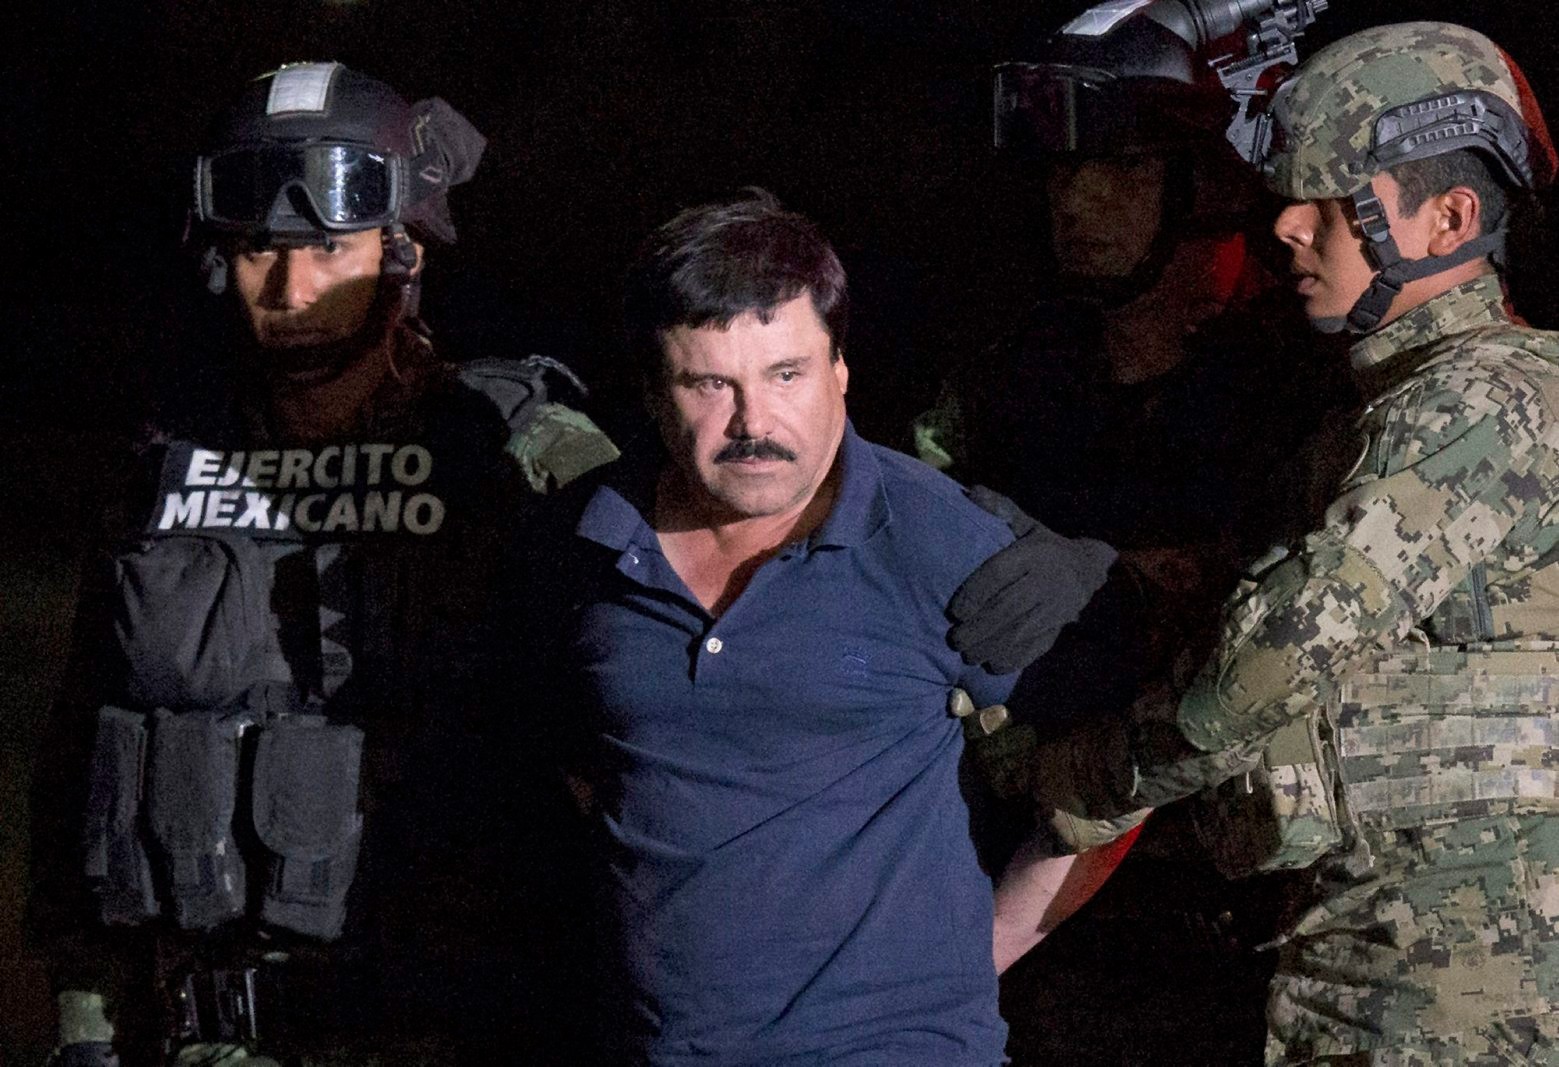 ALTERNATIVE CROP OF RLB111.- Mexican drug lord Joaquin "El Chapo" Guzman is escorted by army soldiers  to a waiting helicopter, at a federal hangar in Mexico City, Friday, Jan. 8, 2016. The world's most wanted drug lord was recaptured by Mexican marines Friday, six months after he fled through a tunnel from a maximum secuirty prison in a made-for-Hollywood escape that deeply embarrassed the government and strained ties with the United States. (AP Photo/Rebecca Blackwell) Mexico Drug Lord